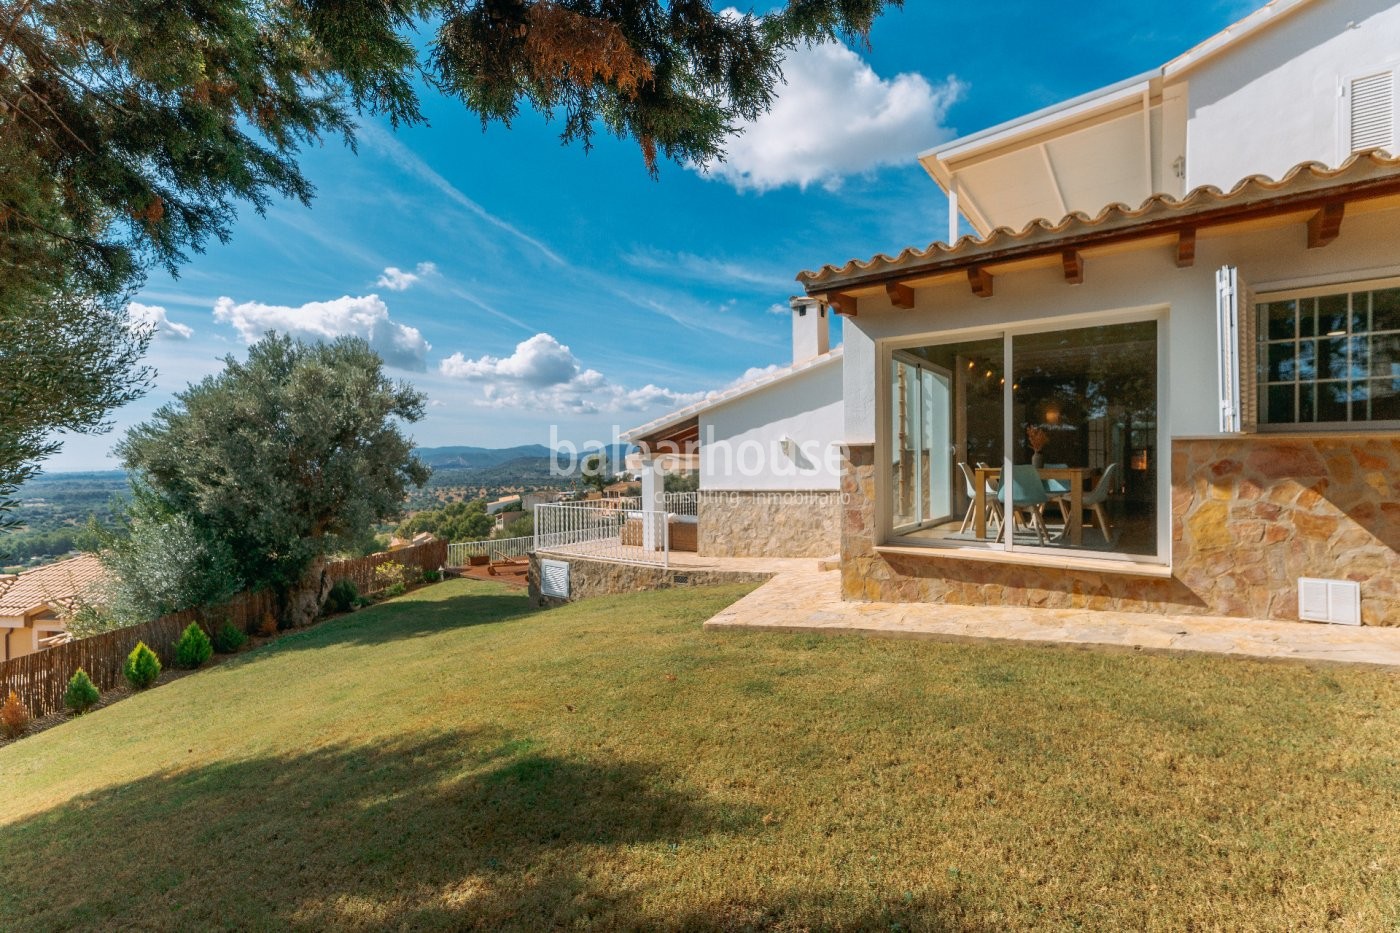 Beautiful mediterranean villa in Bunyola with great views to the mountains and the sea.